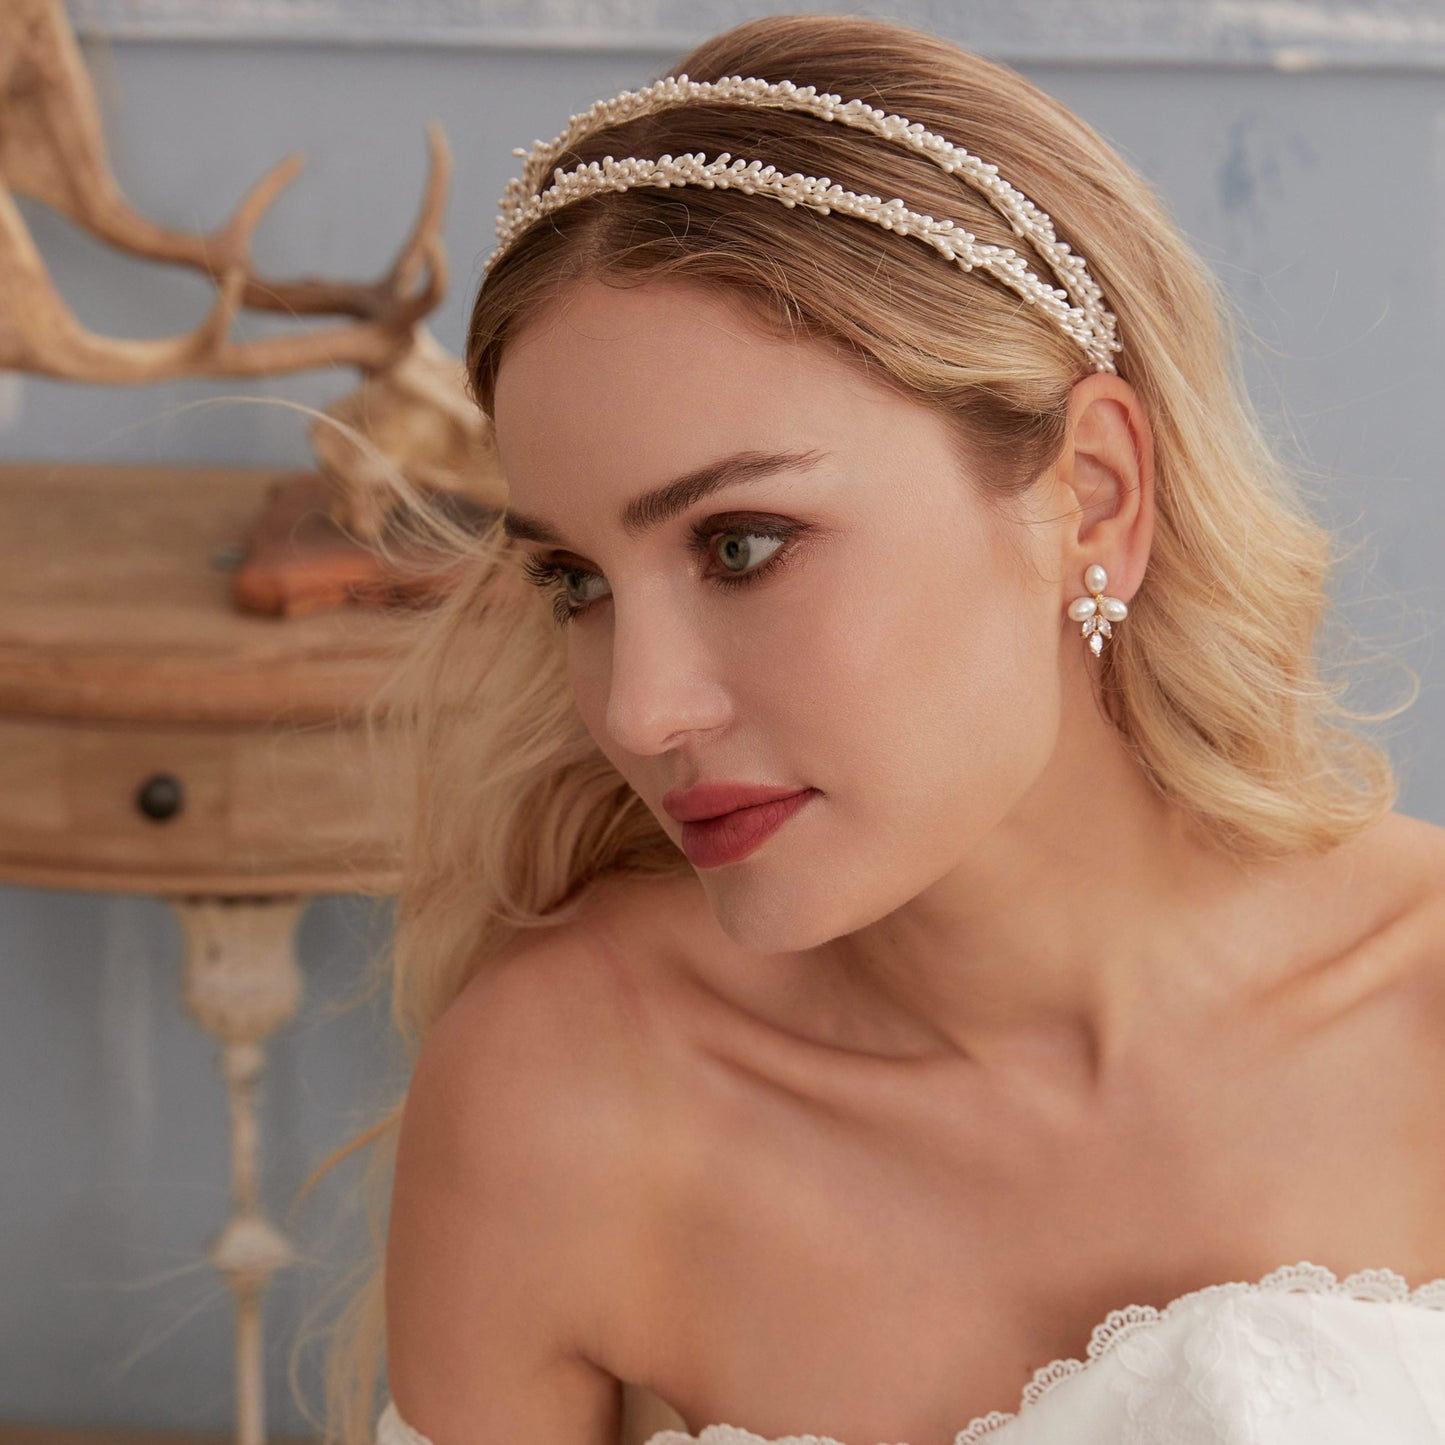 Stunning Baby's Breath-inspired wedding headband. Featuring two rows of delicate faux pearls resembling Baby's Breath flowers, this stunning bridal accessory adds a touch of magic to your wedding look.